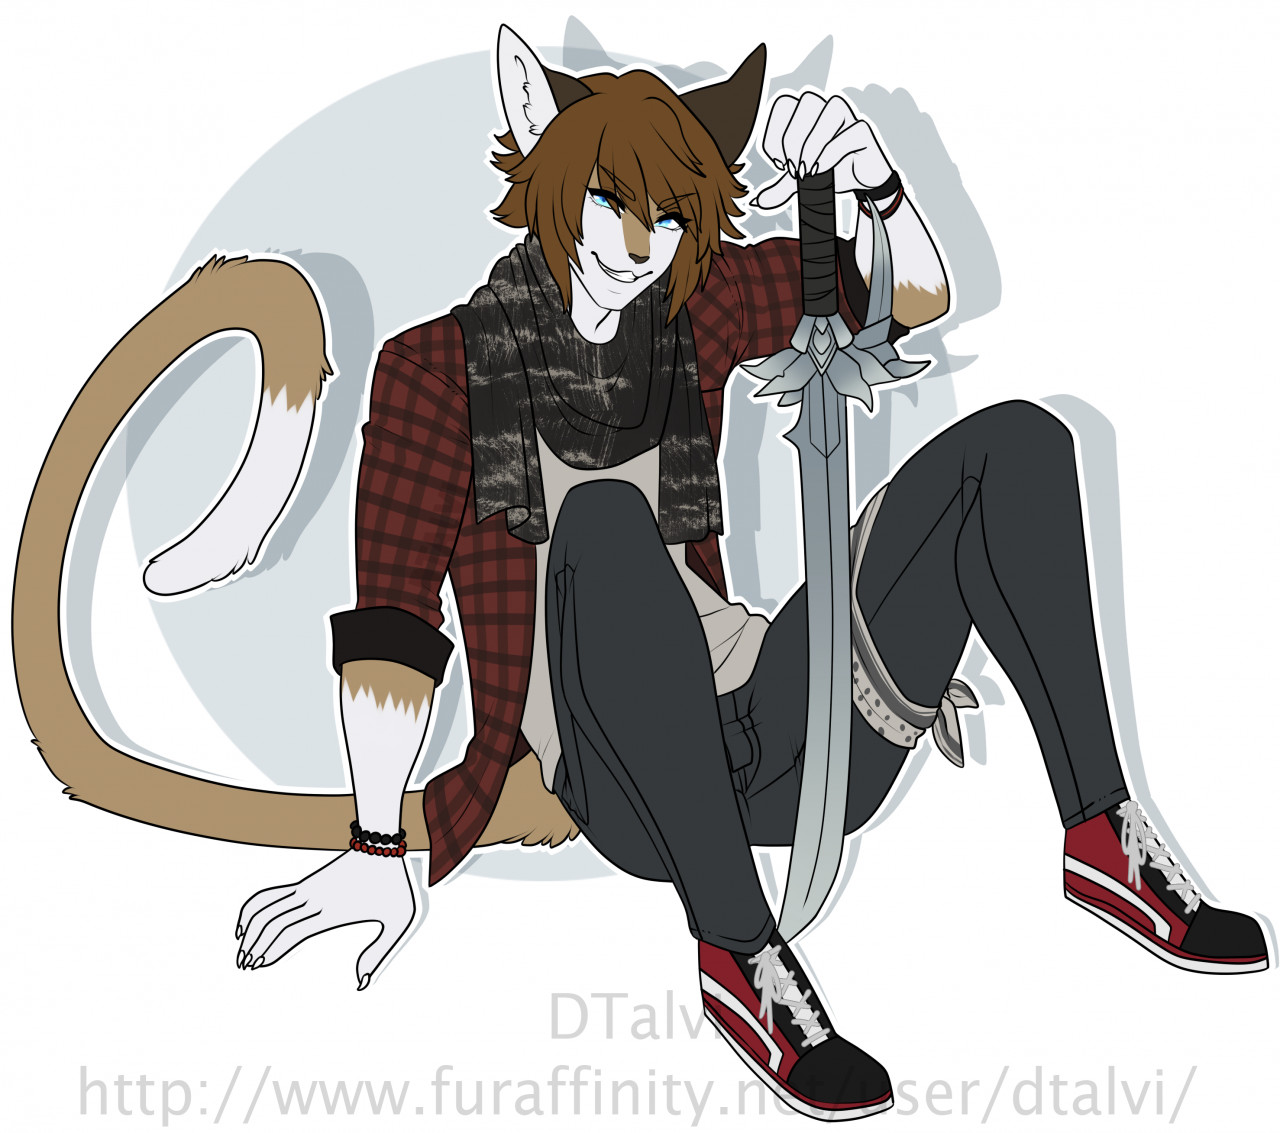 Stream Commission for Yuri-The-Cat by DTalvi -- Fur Affinity [dot] net